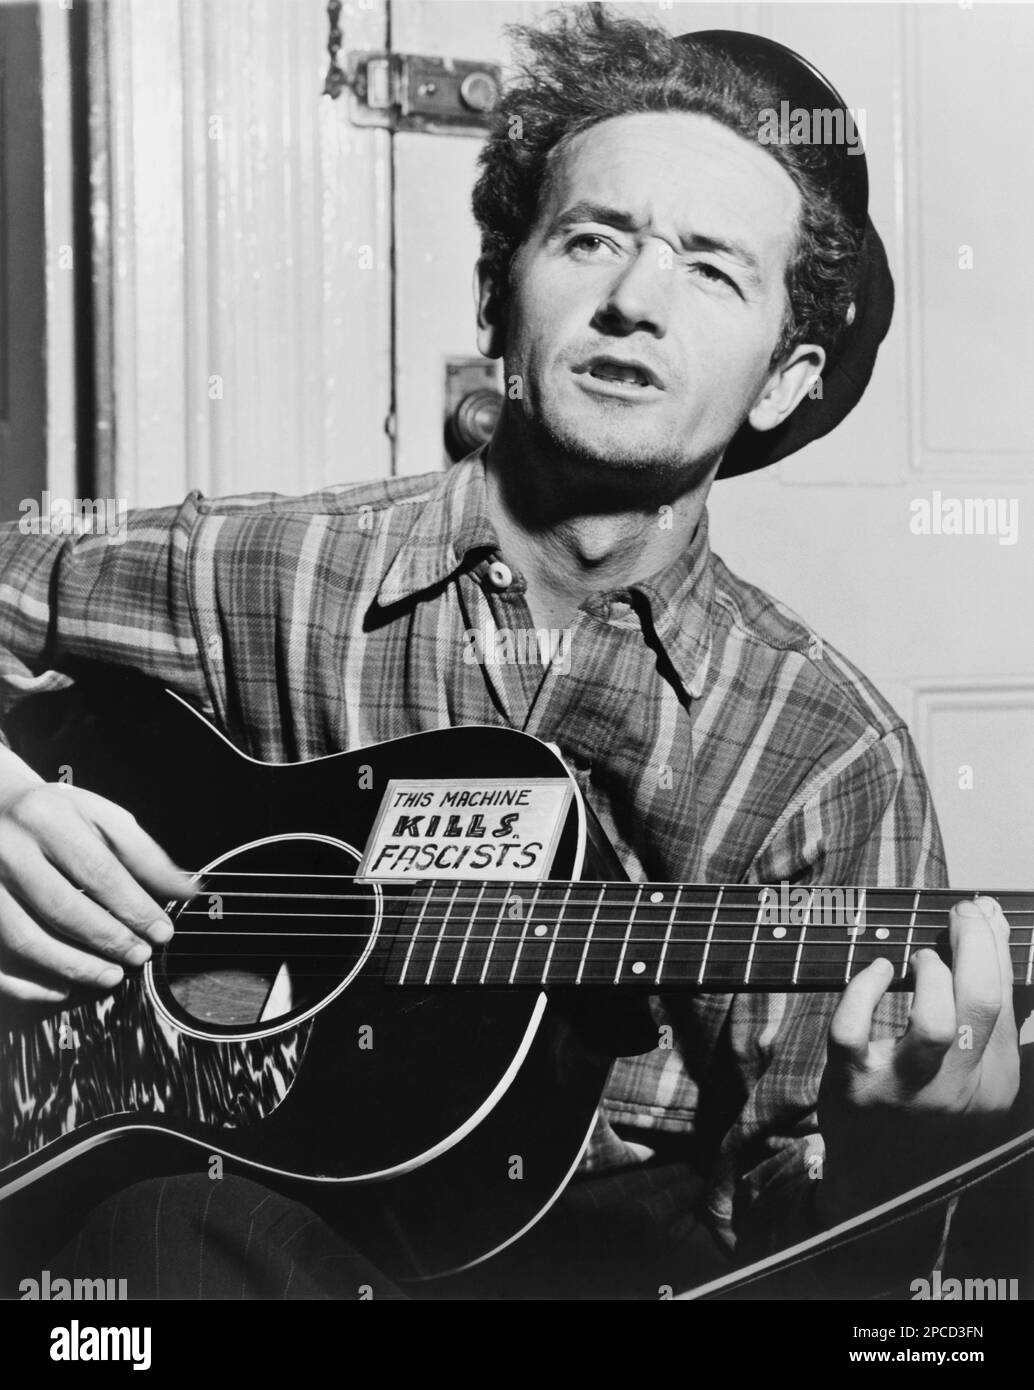 1943 , 8 march , USA :  The celebrated  american Country   singer  WOODY GUTHRIE (born Woodrow Wilson Guthrie , 1912 - 1967 ).  Photo by by Al Aumuller . Is best known as an American singer-songwriter and folk musician, whose musical legacy includes hundreds of political, traditional and children's songs, ballads and improvised works. He frequently performed with the slogan 'This Machine Kills Fascists' displayed on his guitar. His best known song is probably ' This Land Is Your Land '- CHITARRA - chitarrista - guitarist - MUSIC - ROCK - MUSICA LEGGERA - portrait - ritratto  - musicista - musi Stock Photo